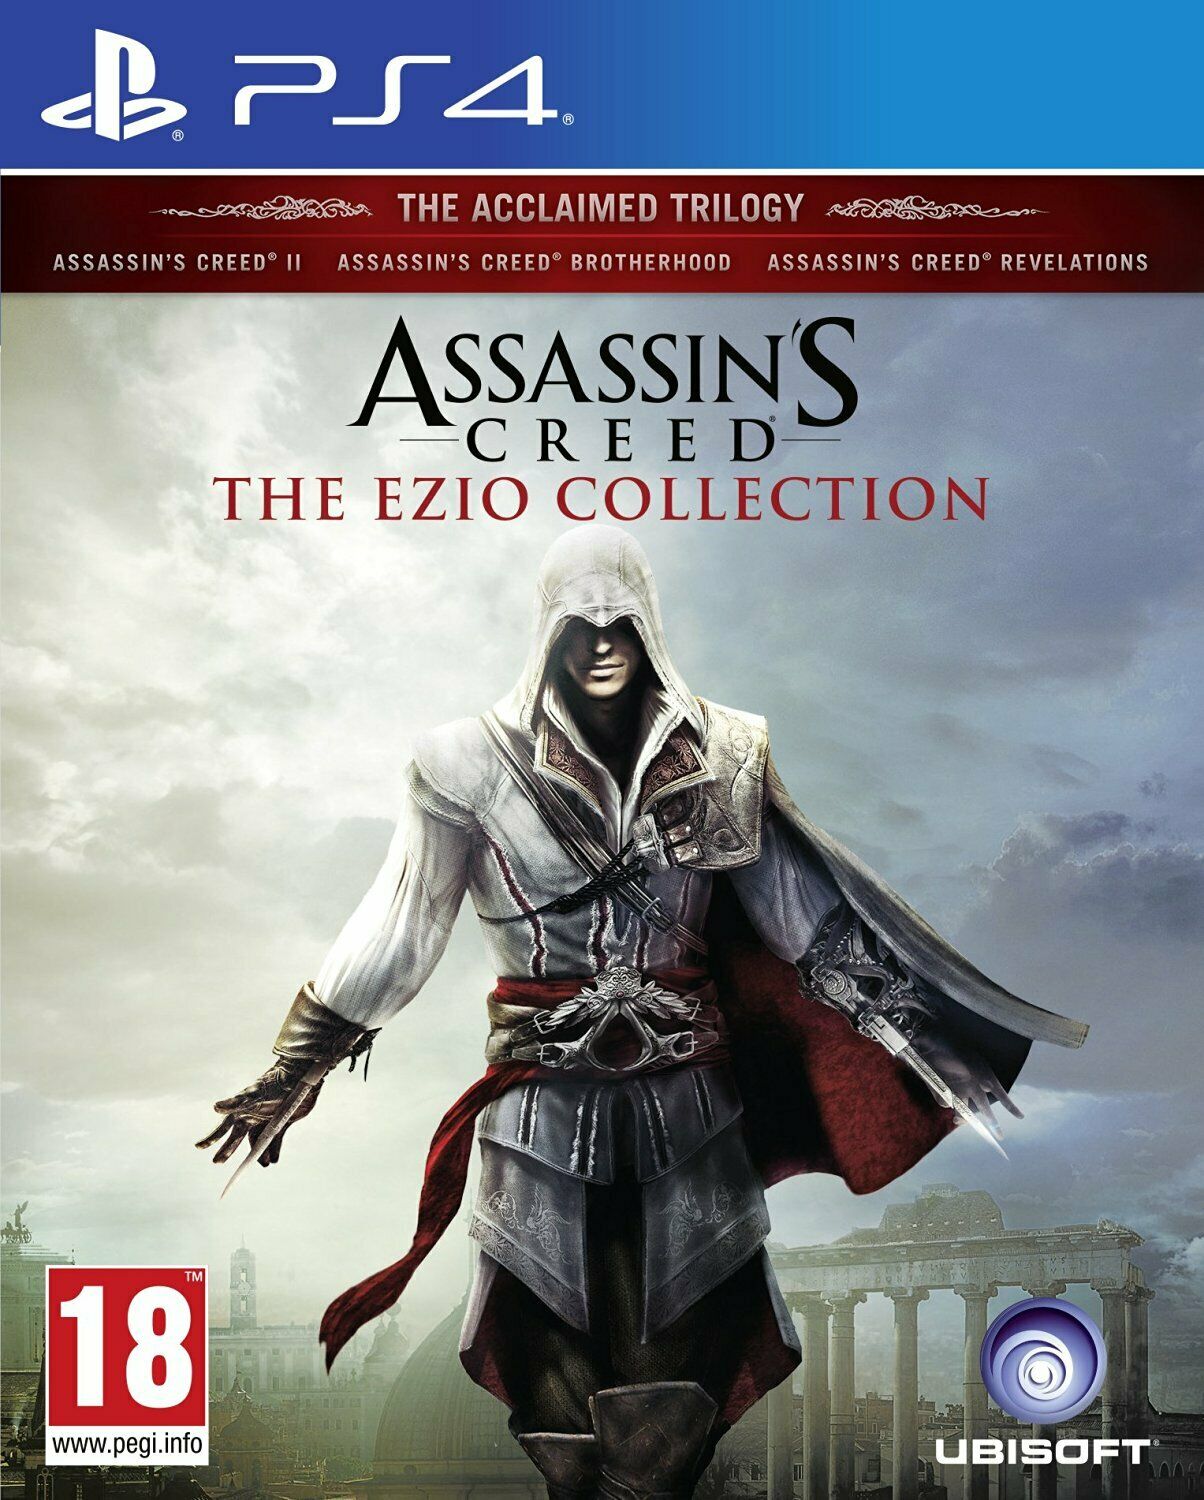 Assassin's Creed The Ezio Collection | PlayStation 4 PS4 - saynama